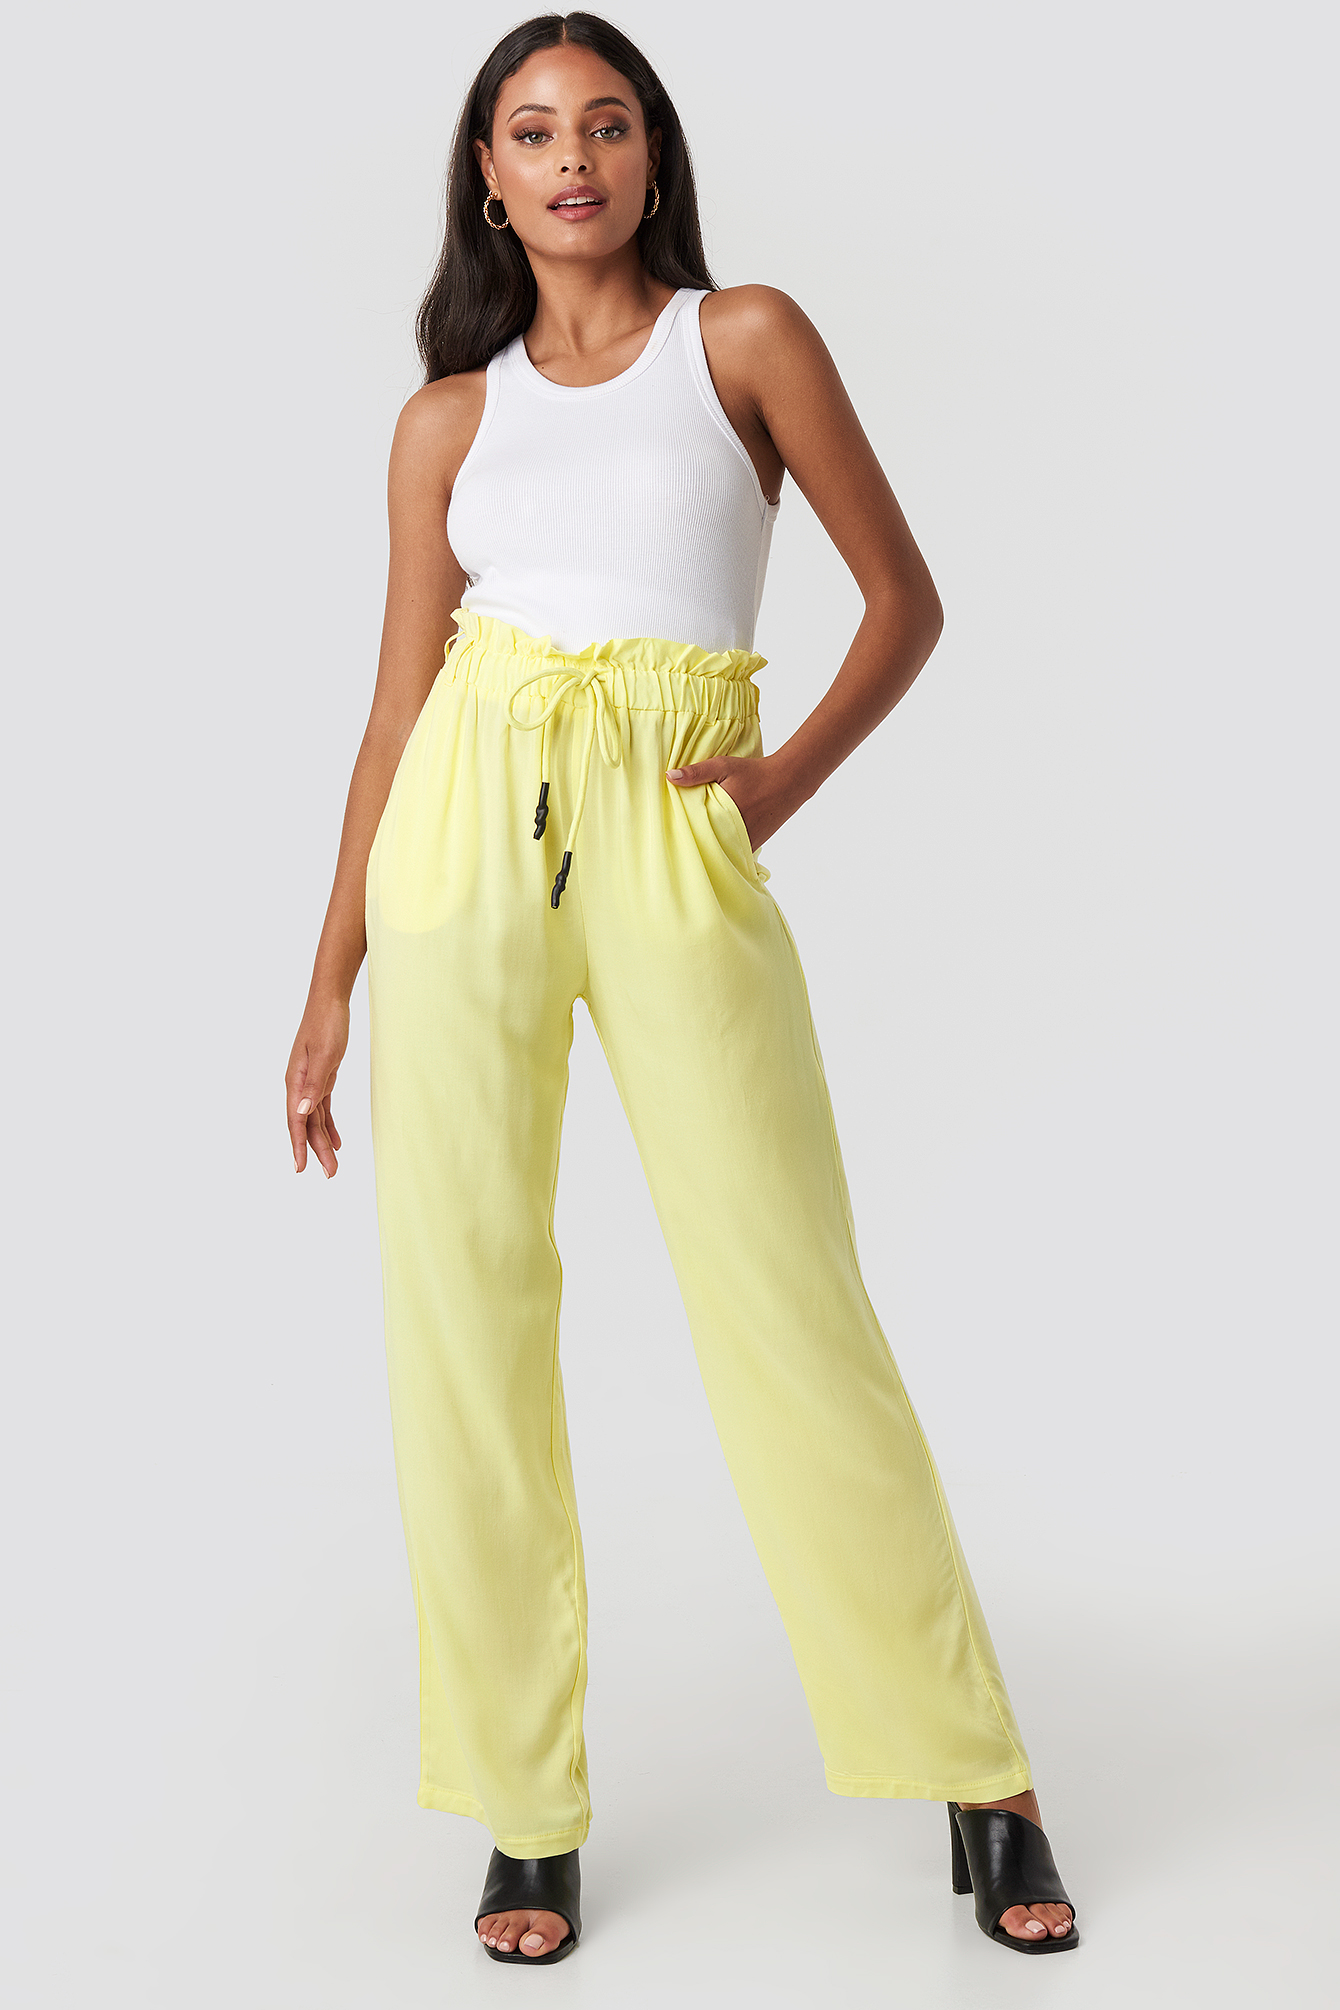 Women's Ankle Length Paperbag Trousers - Who What Wear, Yellow, Size 2  | eBay